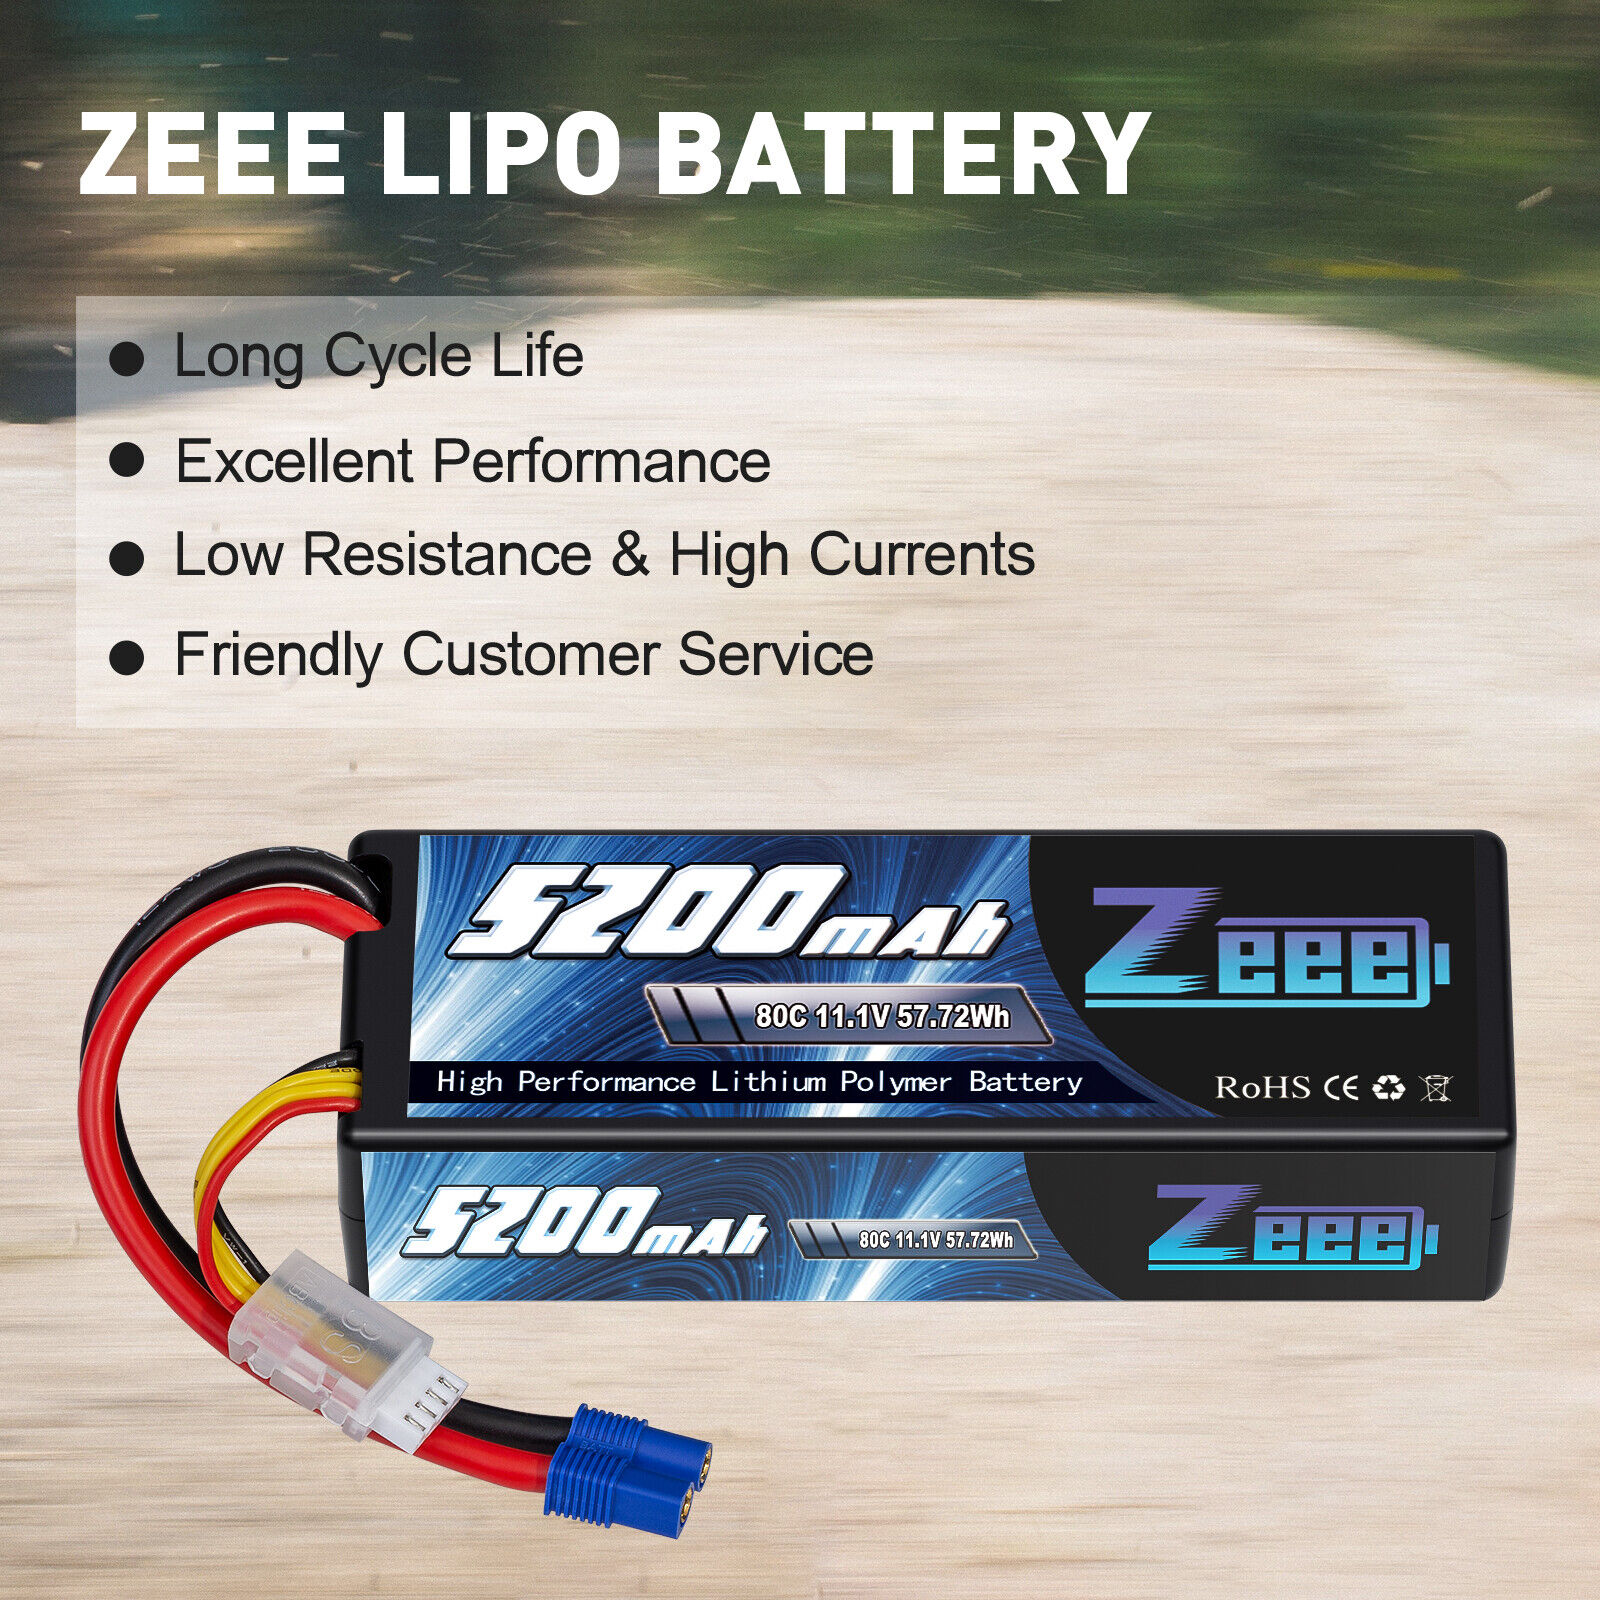 2x Zeee 11.1V 80C 5200mAh EC3 3S LiPo Battery for RC Car Truck Helicopter Buggy ZEEE Does Not Apply - фотография #5